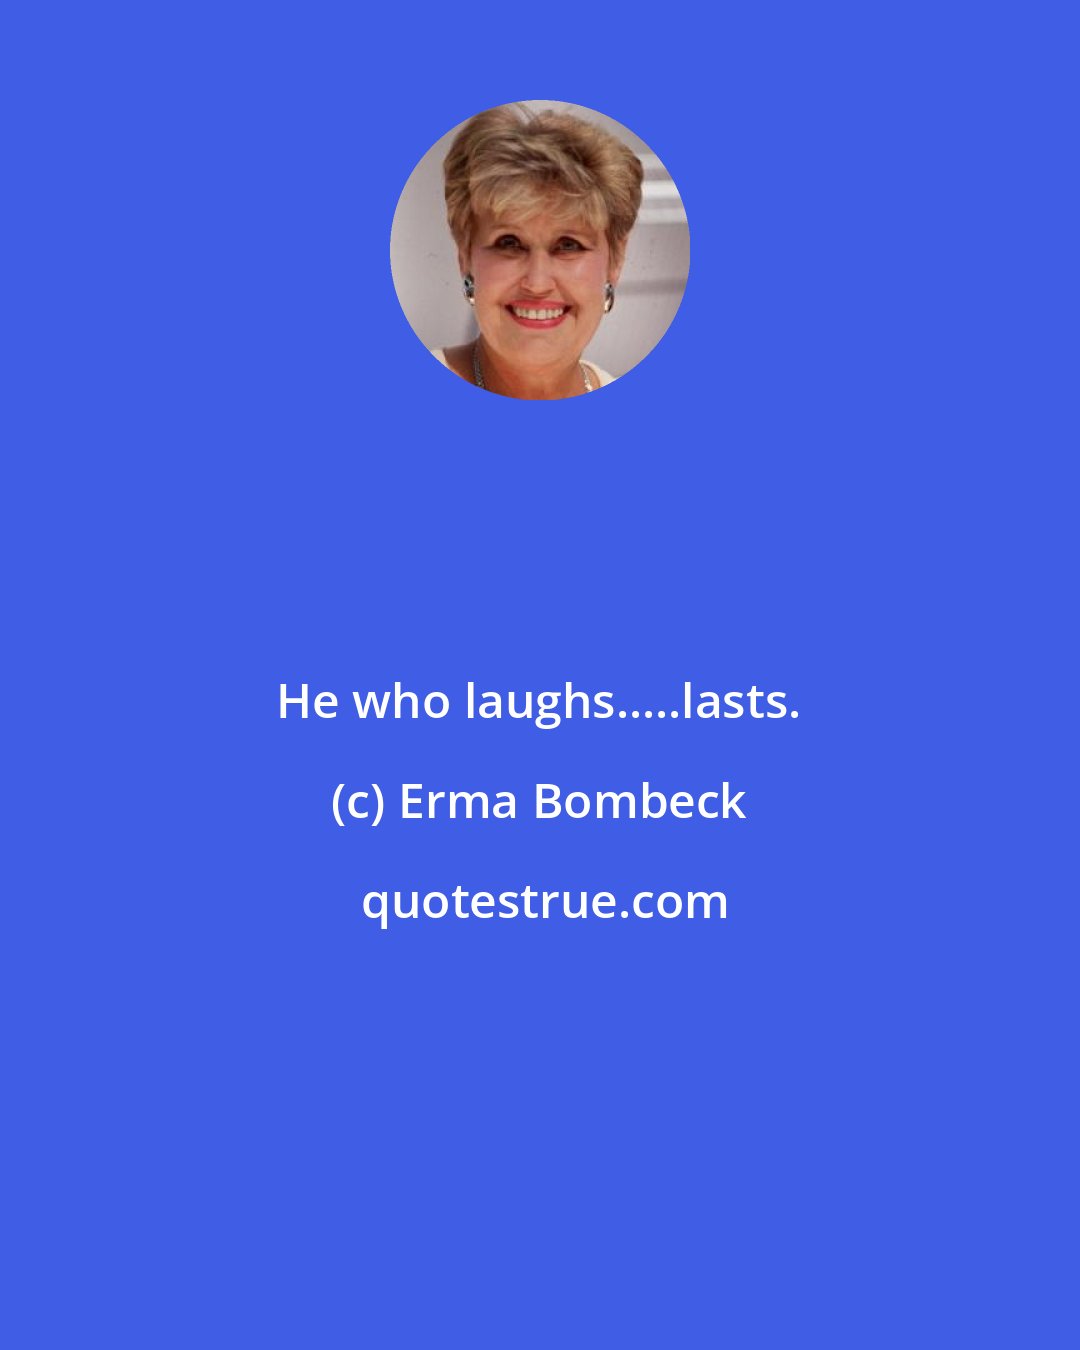 Erma Bombeck: He who laughs.....lasts.